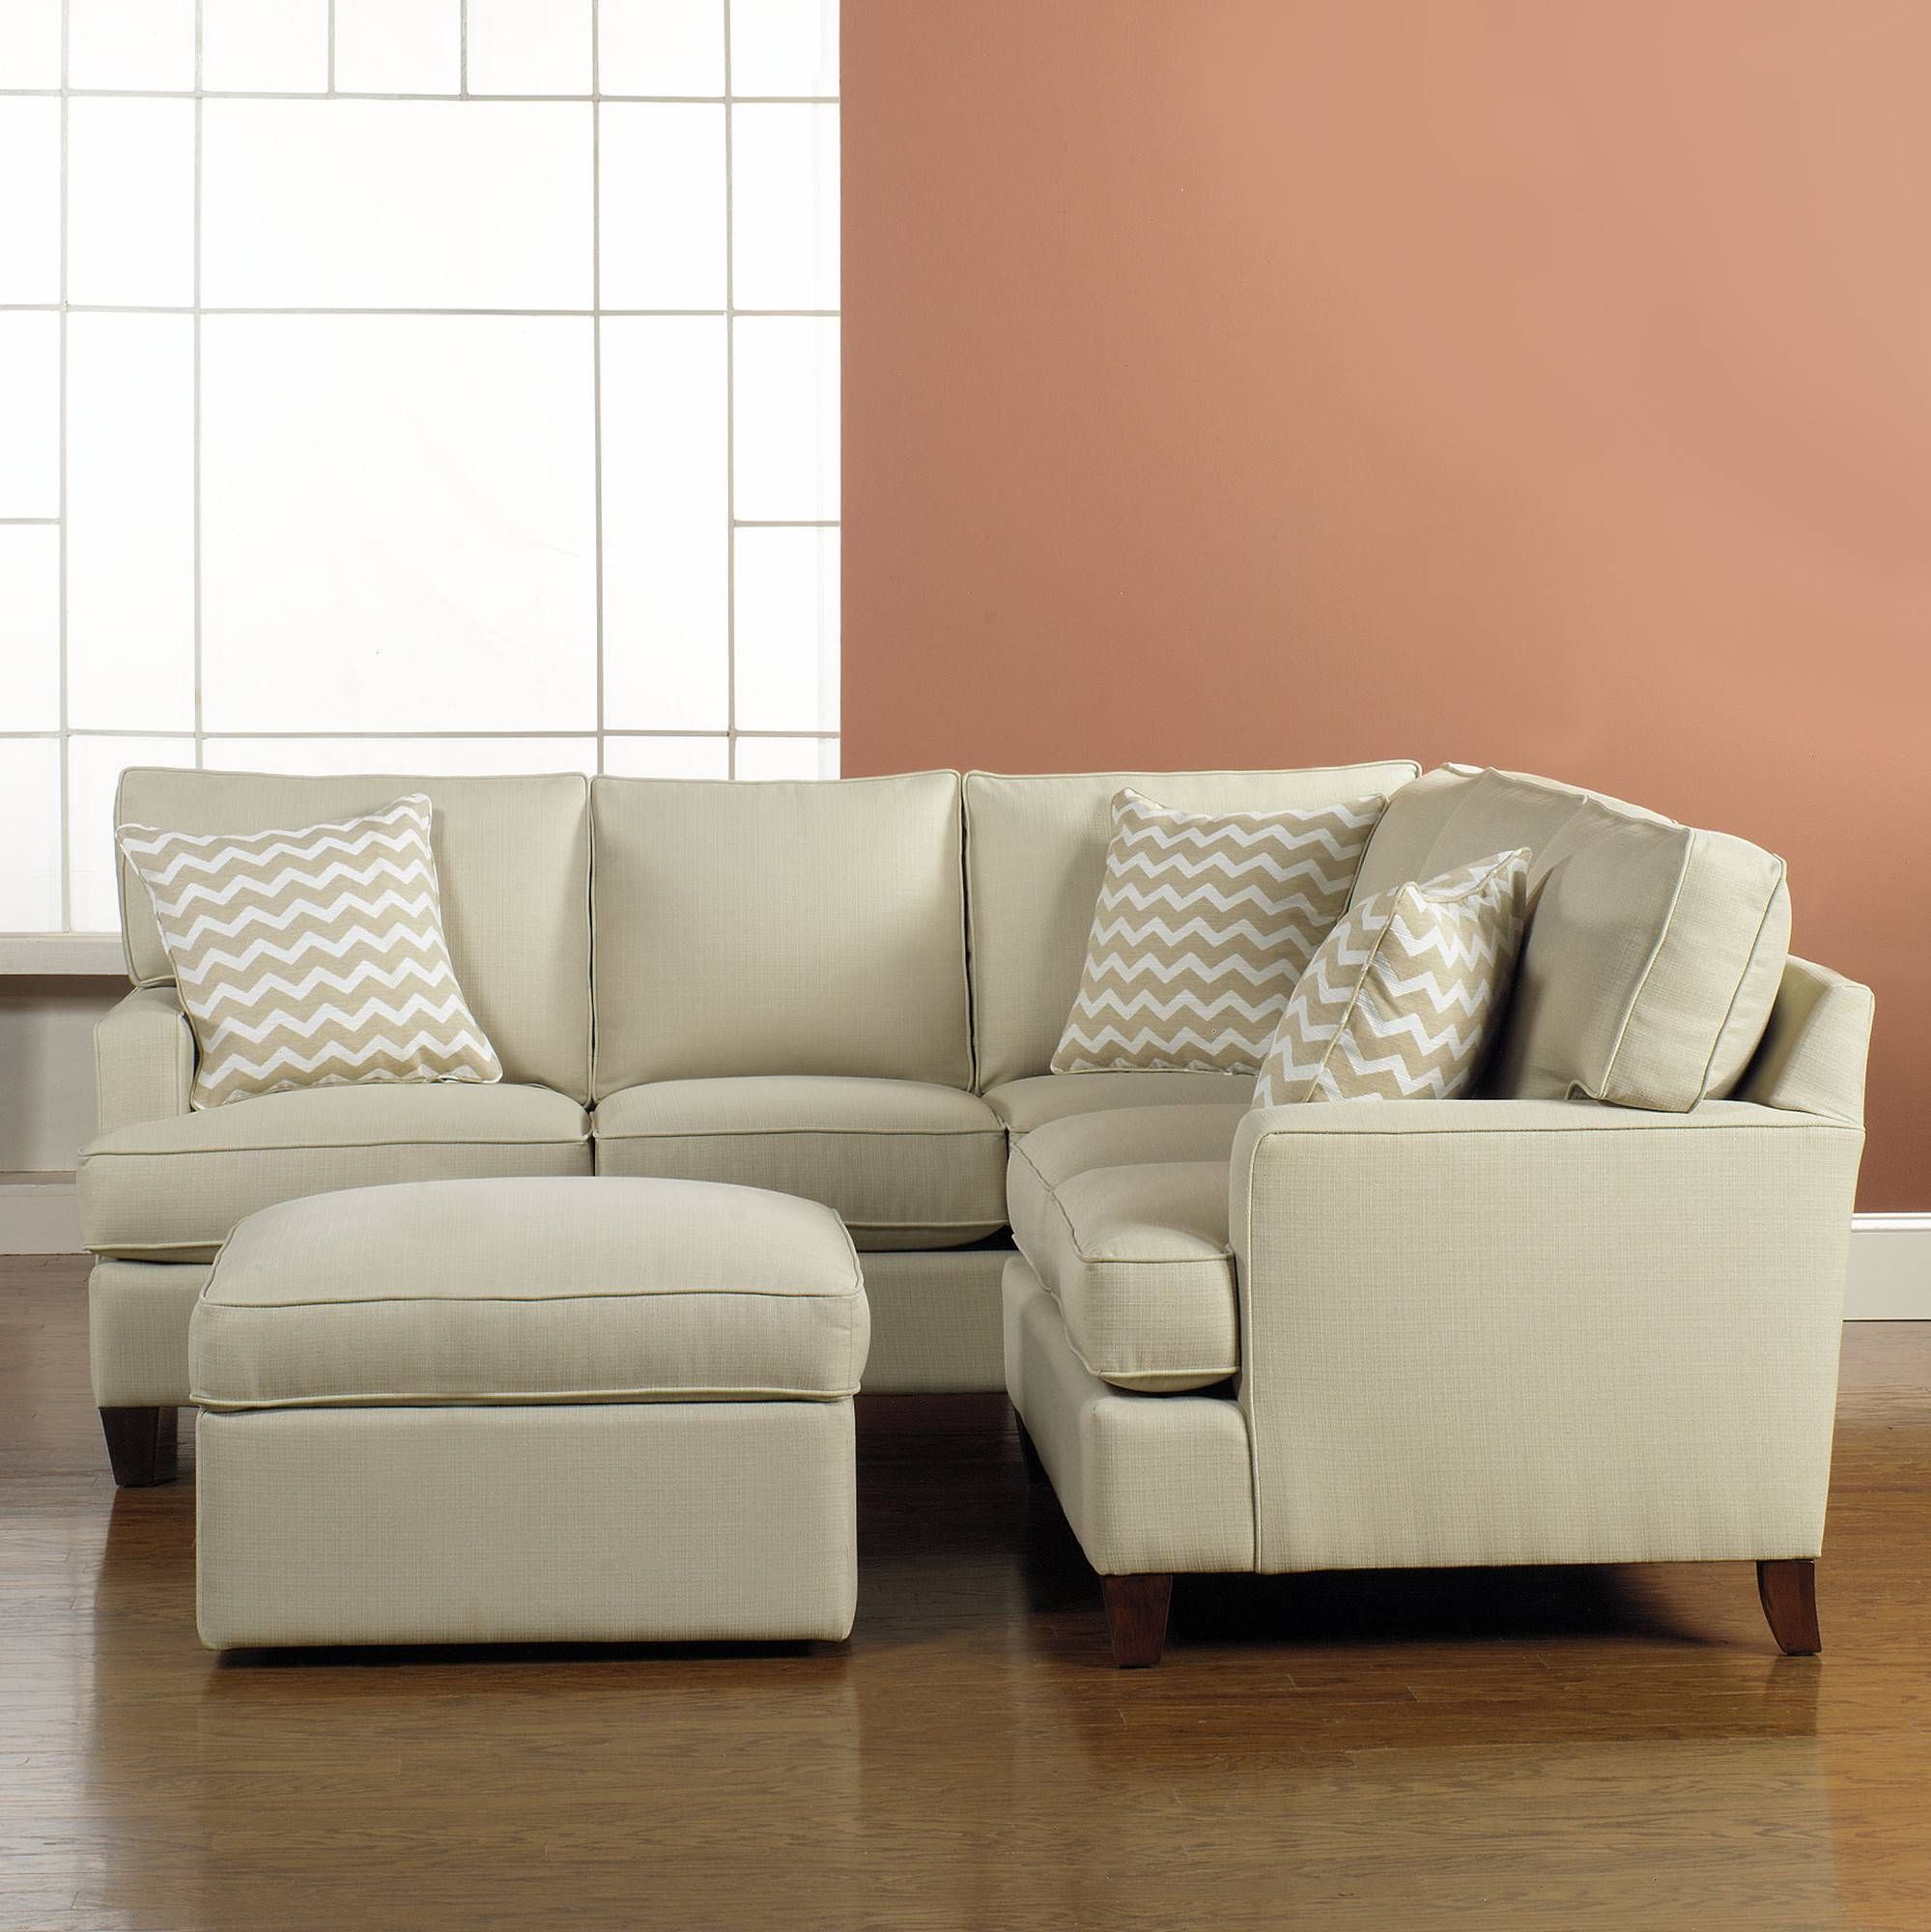 Small Space Sofas Top 10 Contemporary Sofas For Small Spaces With Regard To Modern Sectional Sofas For Small Spaces 